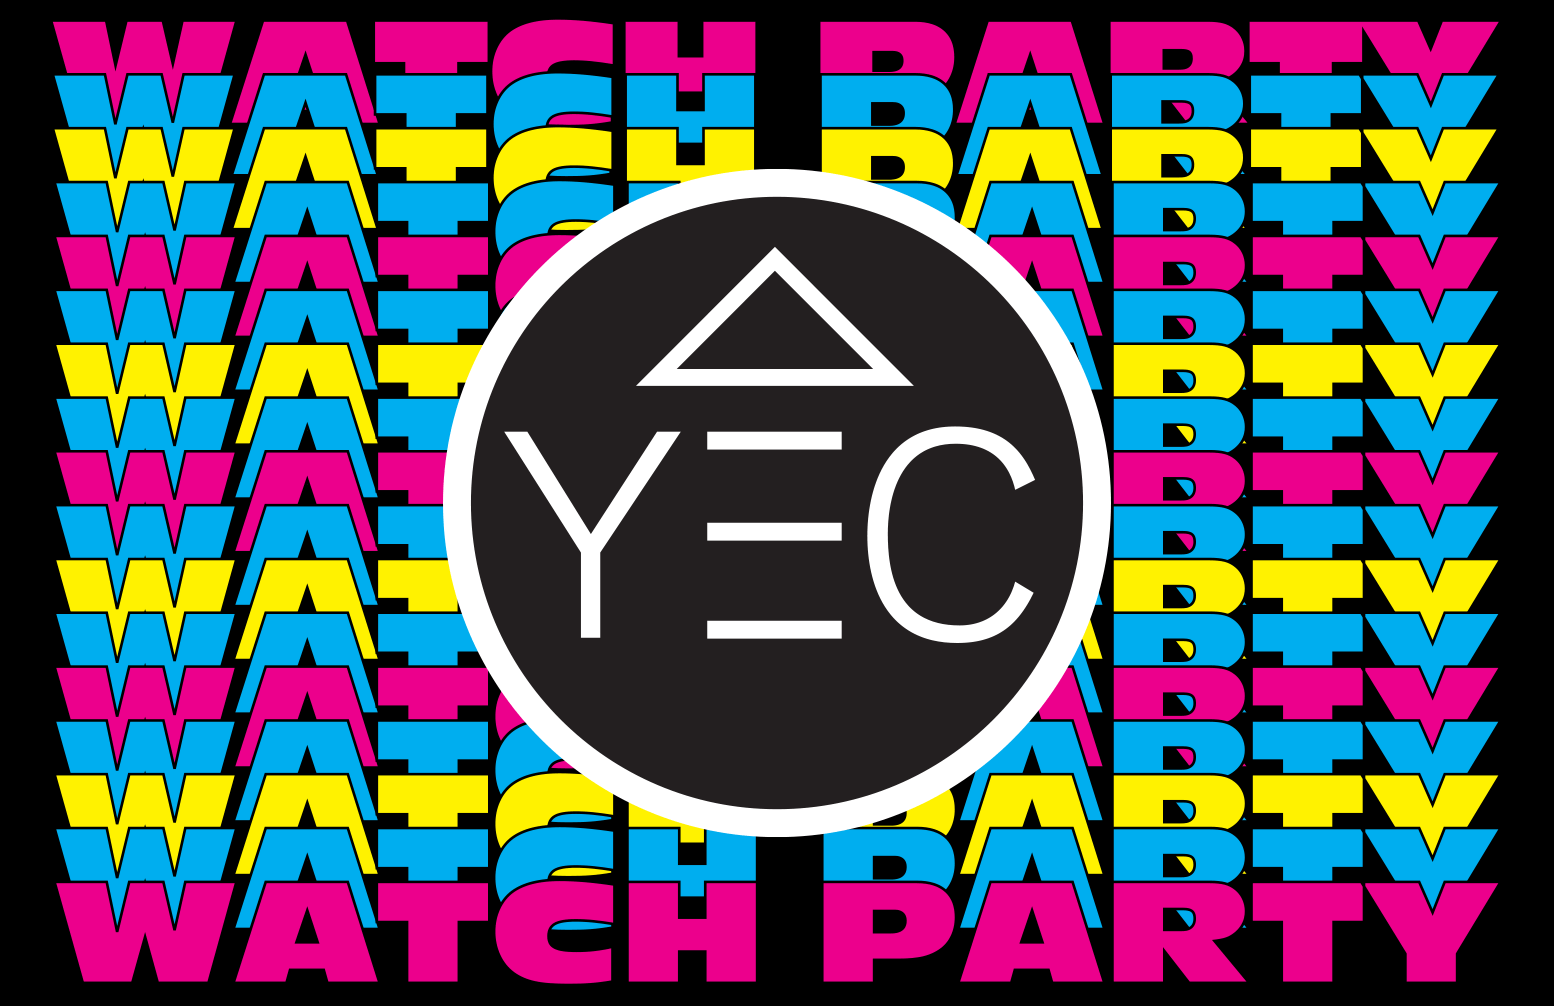 YEC Will Be Virtual This Year - The Youth Evangelistic Conference held by the Tennessee Baptist Mission Board (TBMB) will not meet in person, but have a Virtual version this year. #YEC #YEC2021 #YECWastchParty